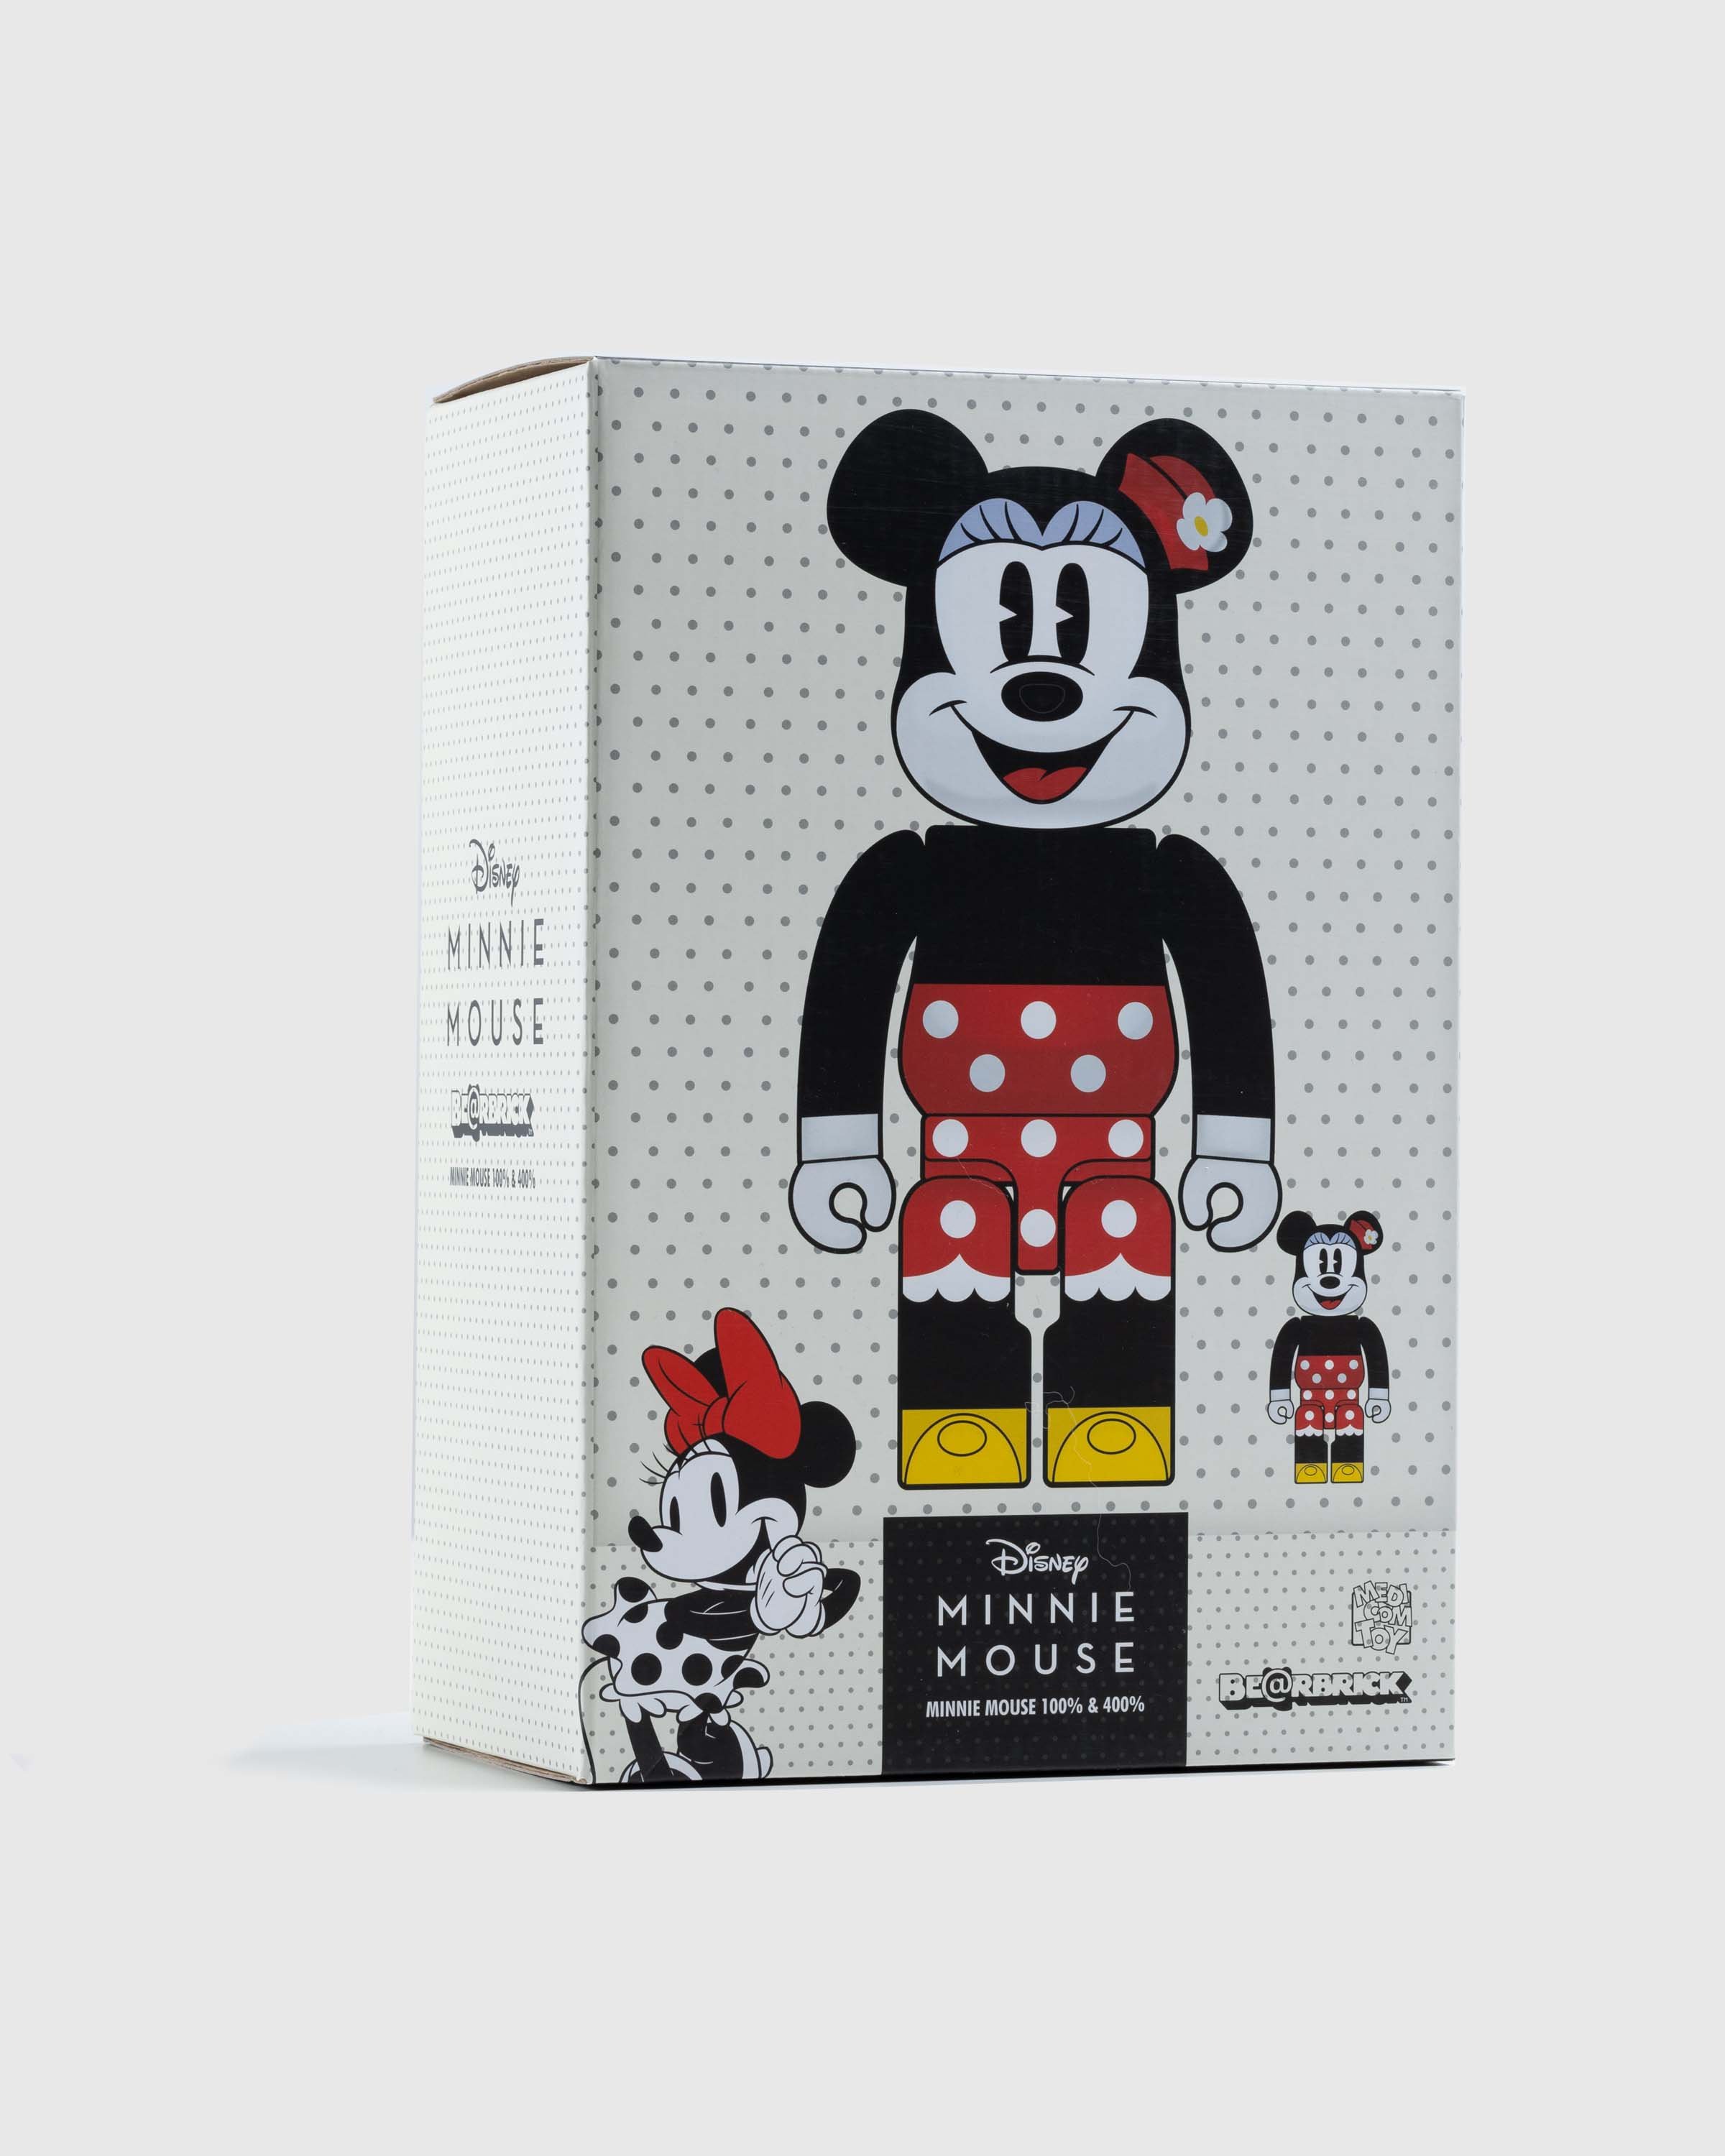 Medicom - Be@rbrick Minnie Mouse 100% and 400% Set Red - Lifestyle - Multi - Image 4